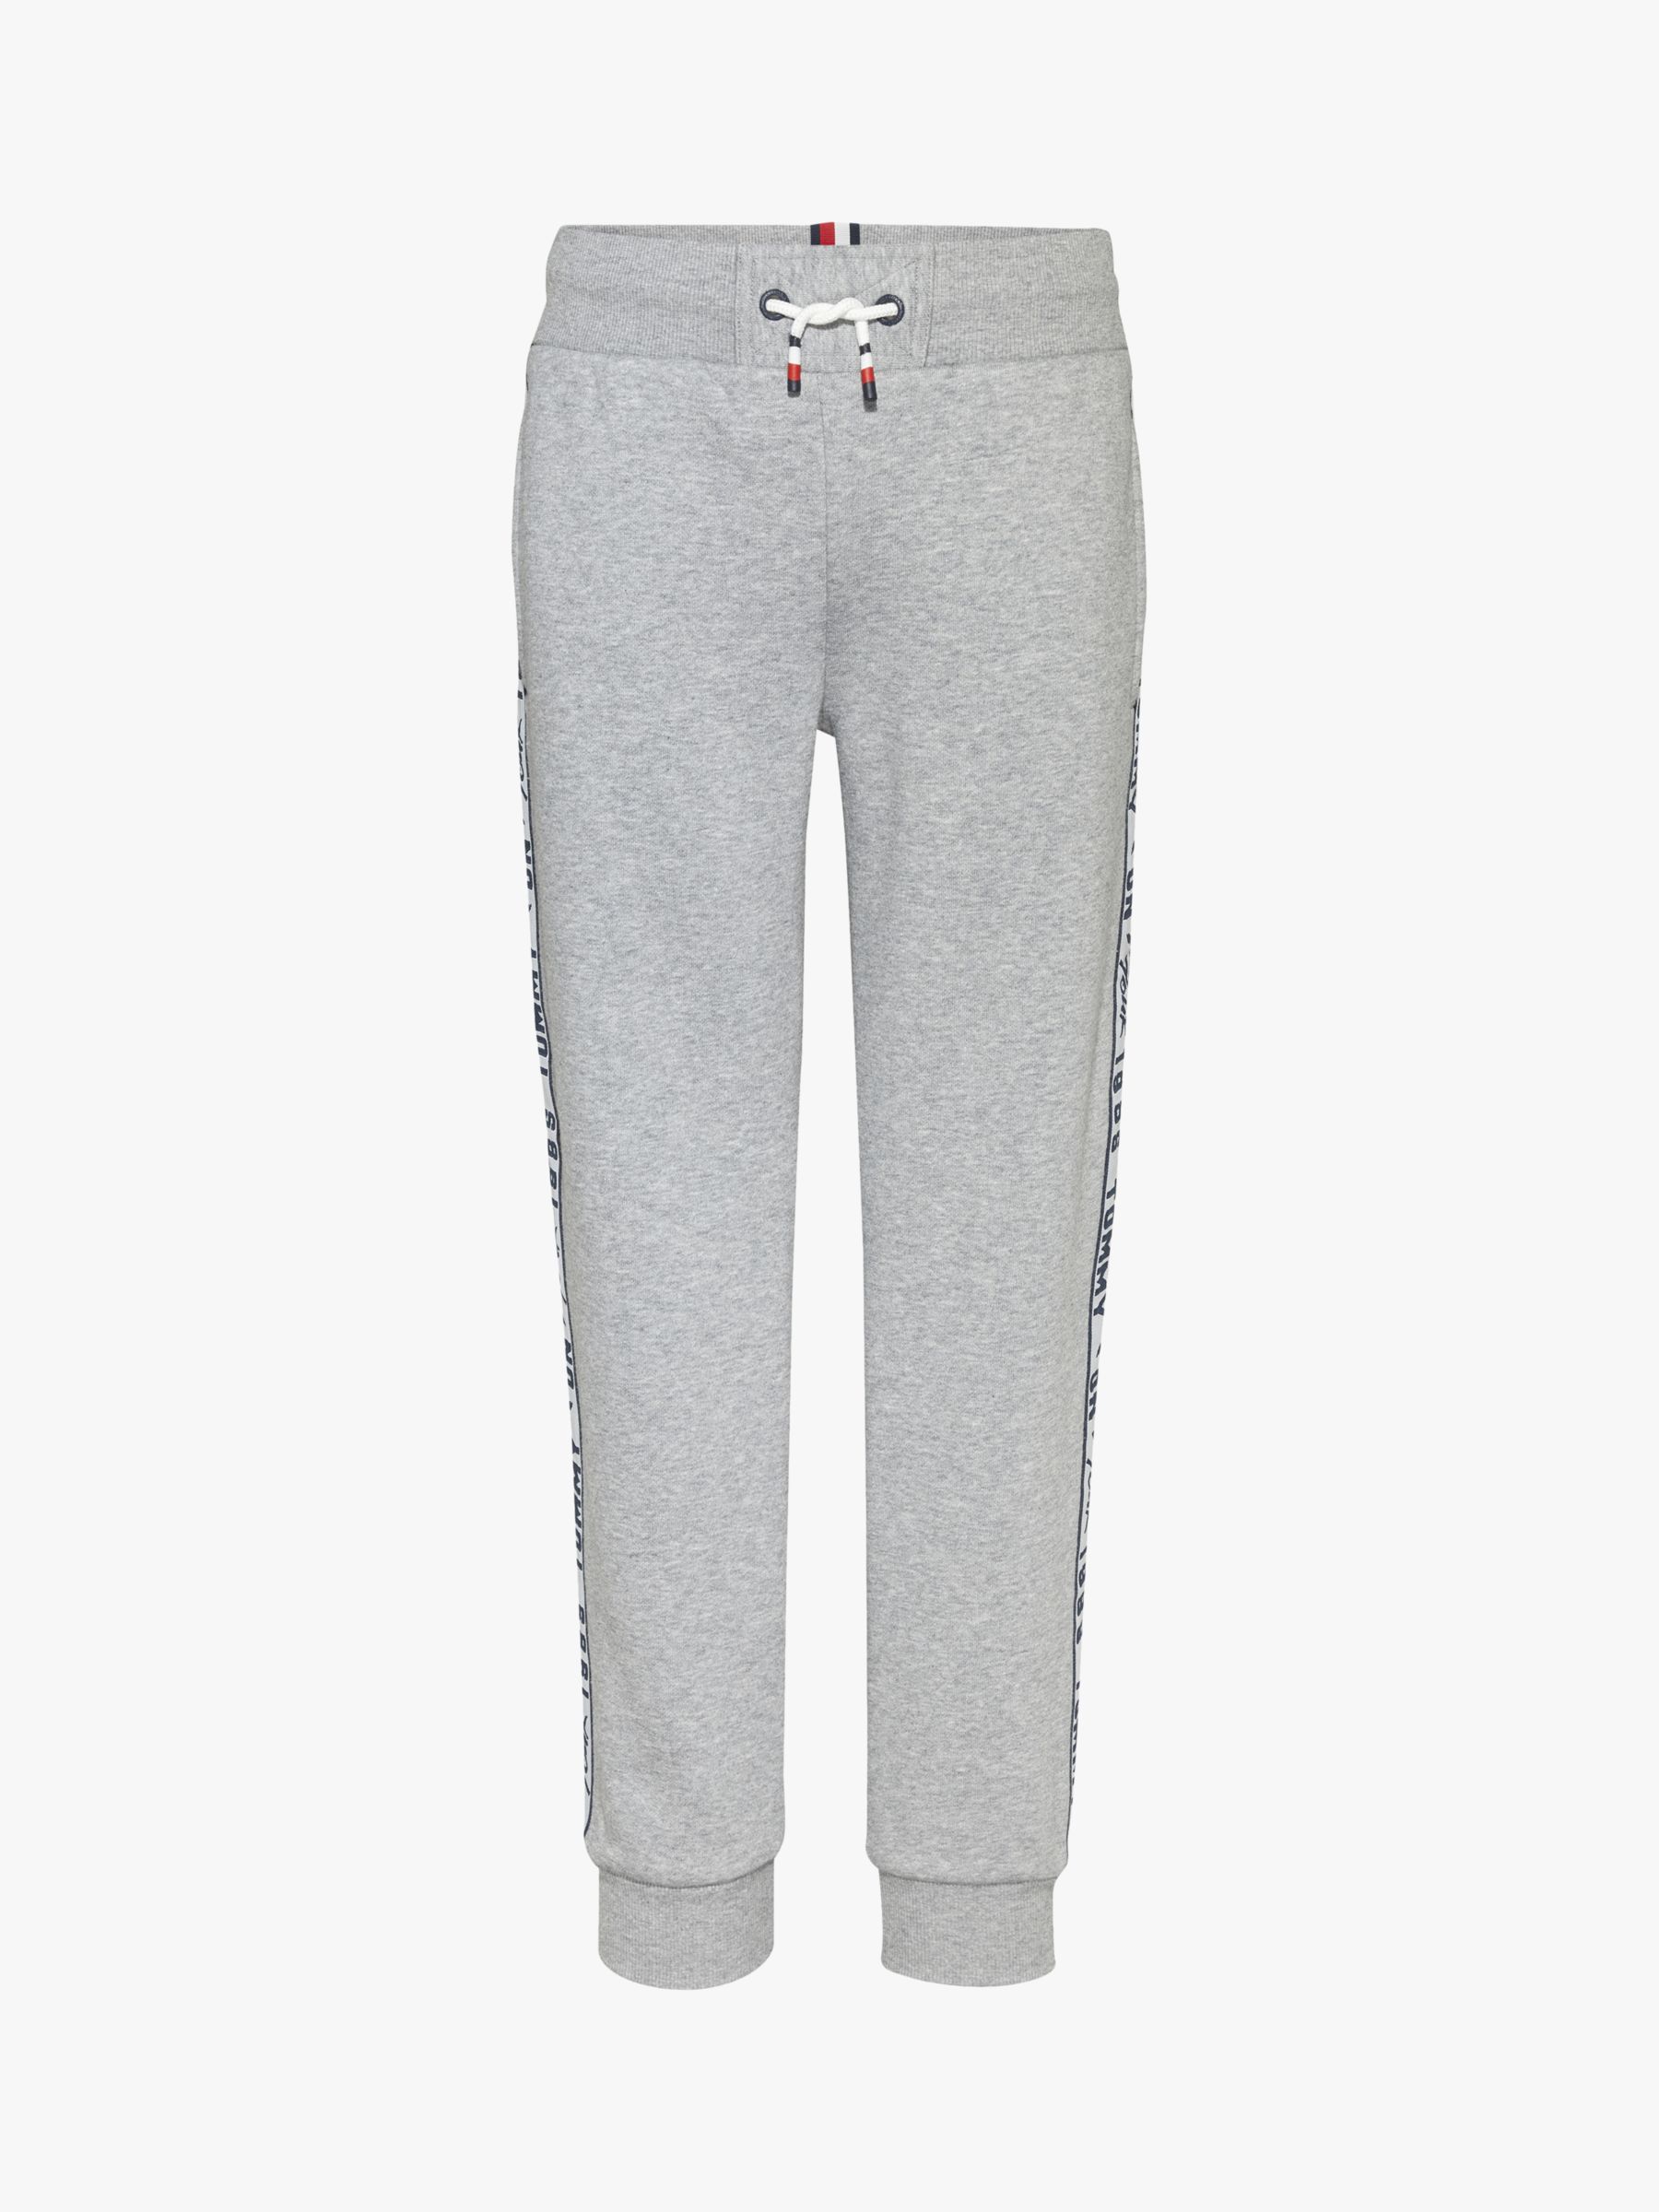 Image of Tommy Hilfiger Boys Organic Cotton Blend Logo Tape Joggers